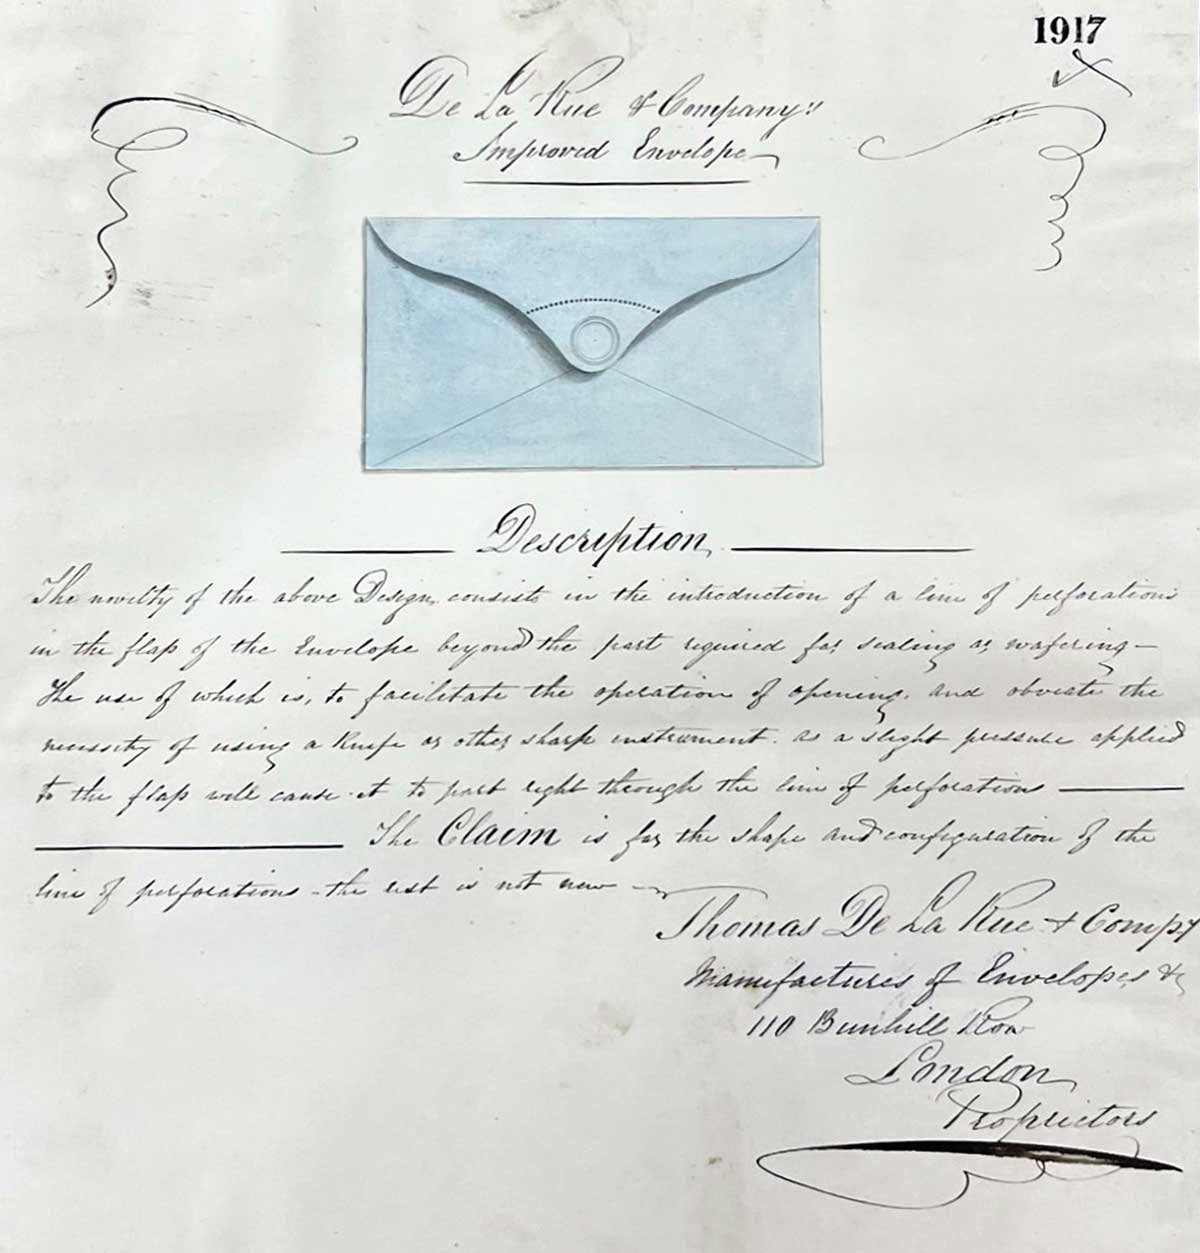 A drawing of a blue envelope with a perforated line on the fold sits above a detailed description.